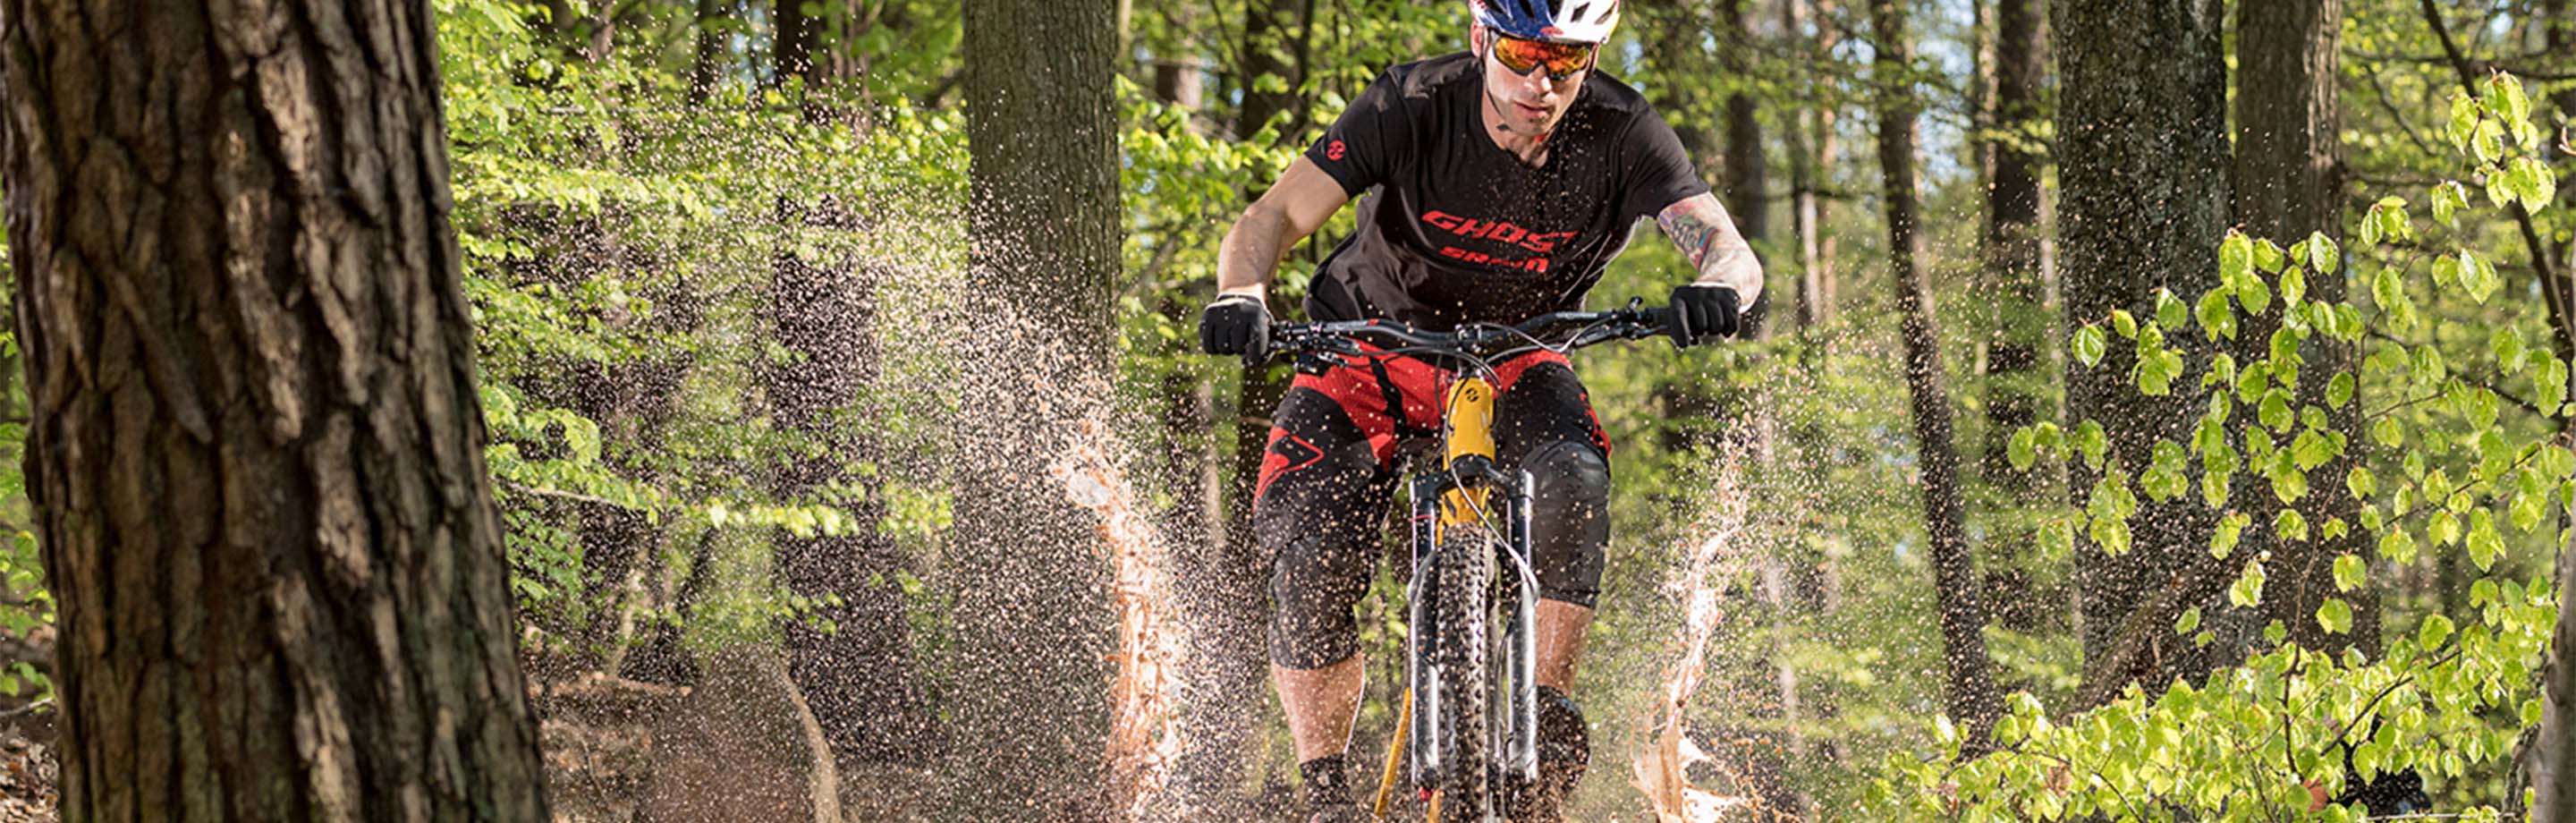 Your bike is constantly exposed to mud and dirt? The solution are MTRX bearings.